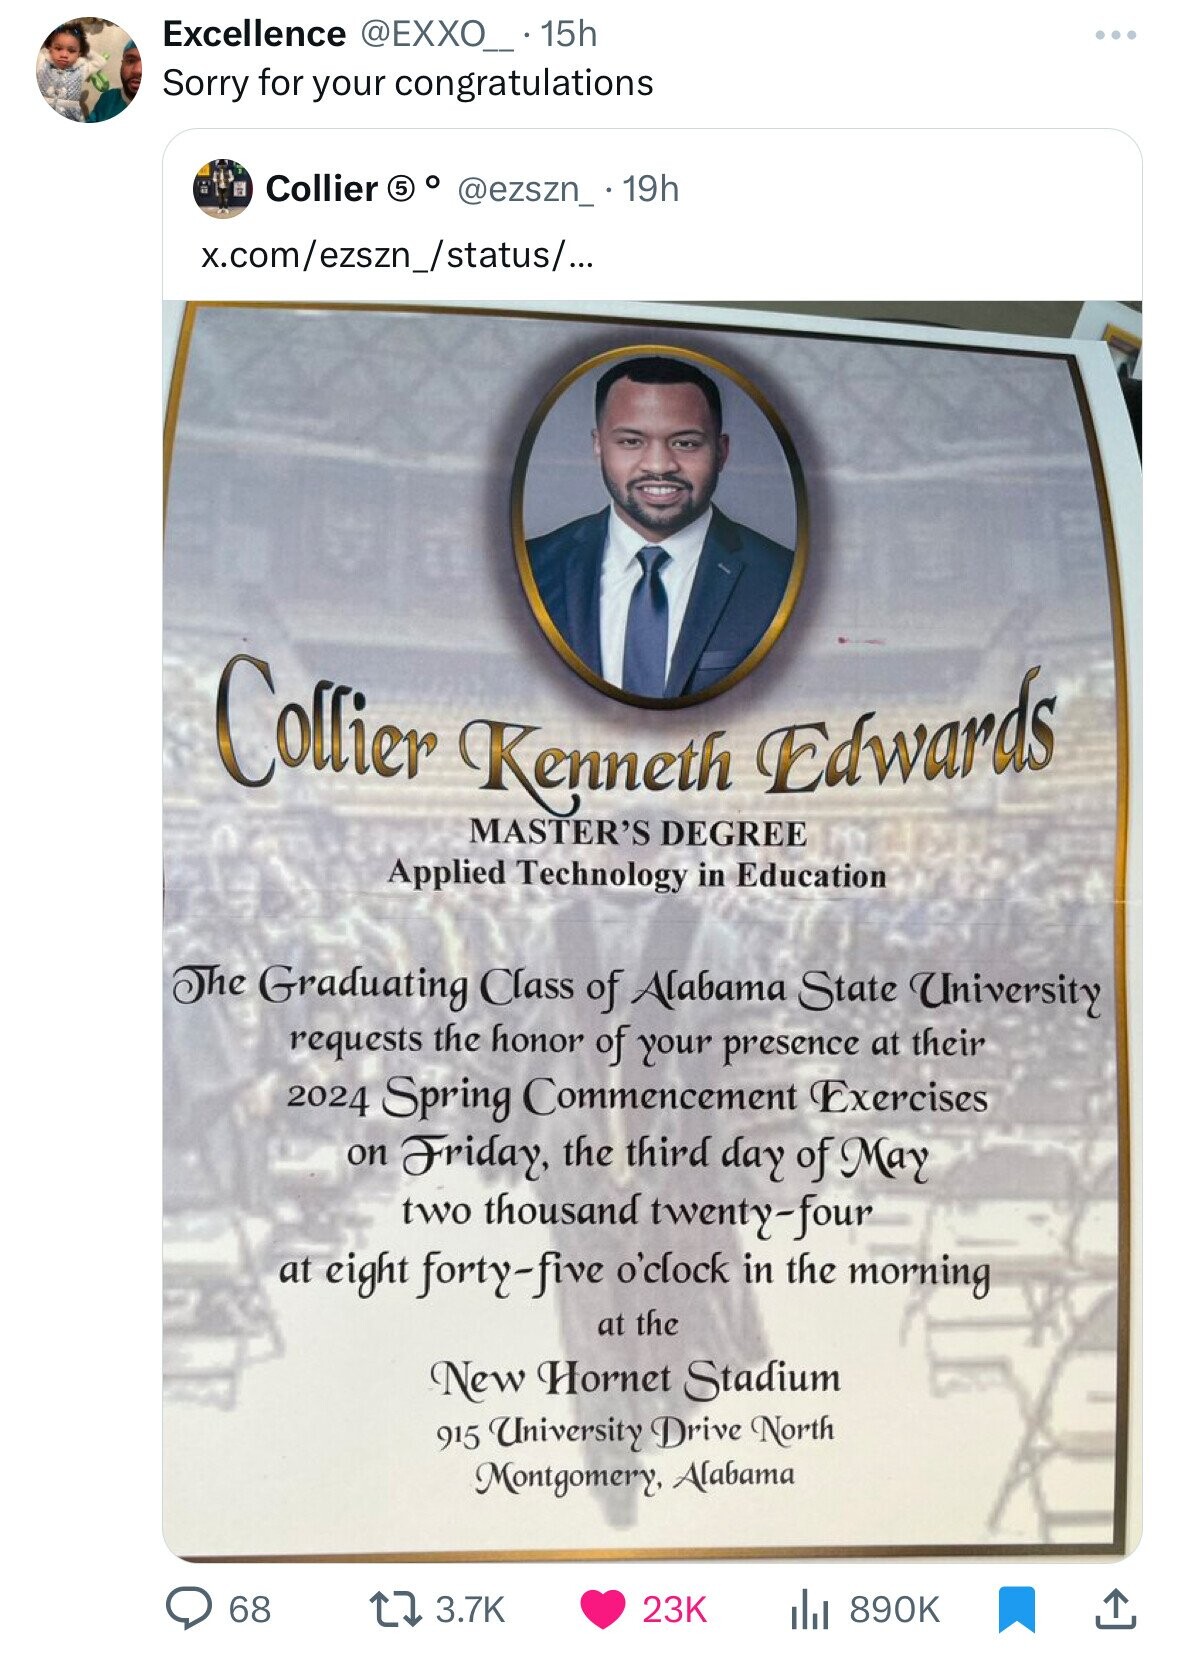 Excellence @EXXO_..15h Sorry for your congratulations Collier 5 o @ezszn_ 19h x.com/ezszn_/status/... Collier Kenneth DEGREE Edwards MASTER'S Applied Technology in Education The Graduating Class of Alabama State University requests the honor of your presence at their 2024 Spring Commencement Exercises on Friday, the third day of May two thousand twenty-four at eight forty-five o'clock in the morning at the New Hornet Stadium 915 University Drive North Montgomery, Alabama 68 3.7K 23K 890K 